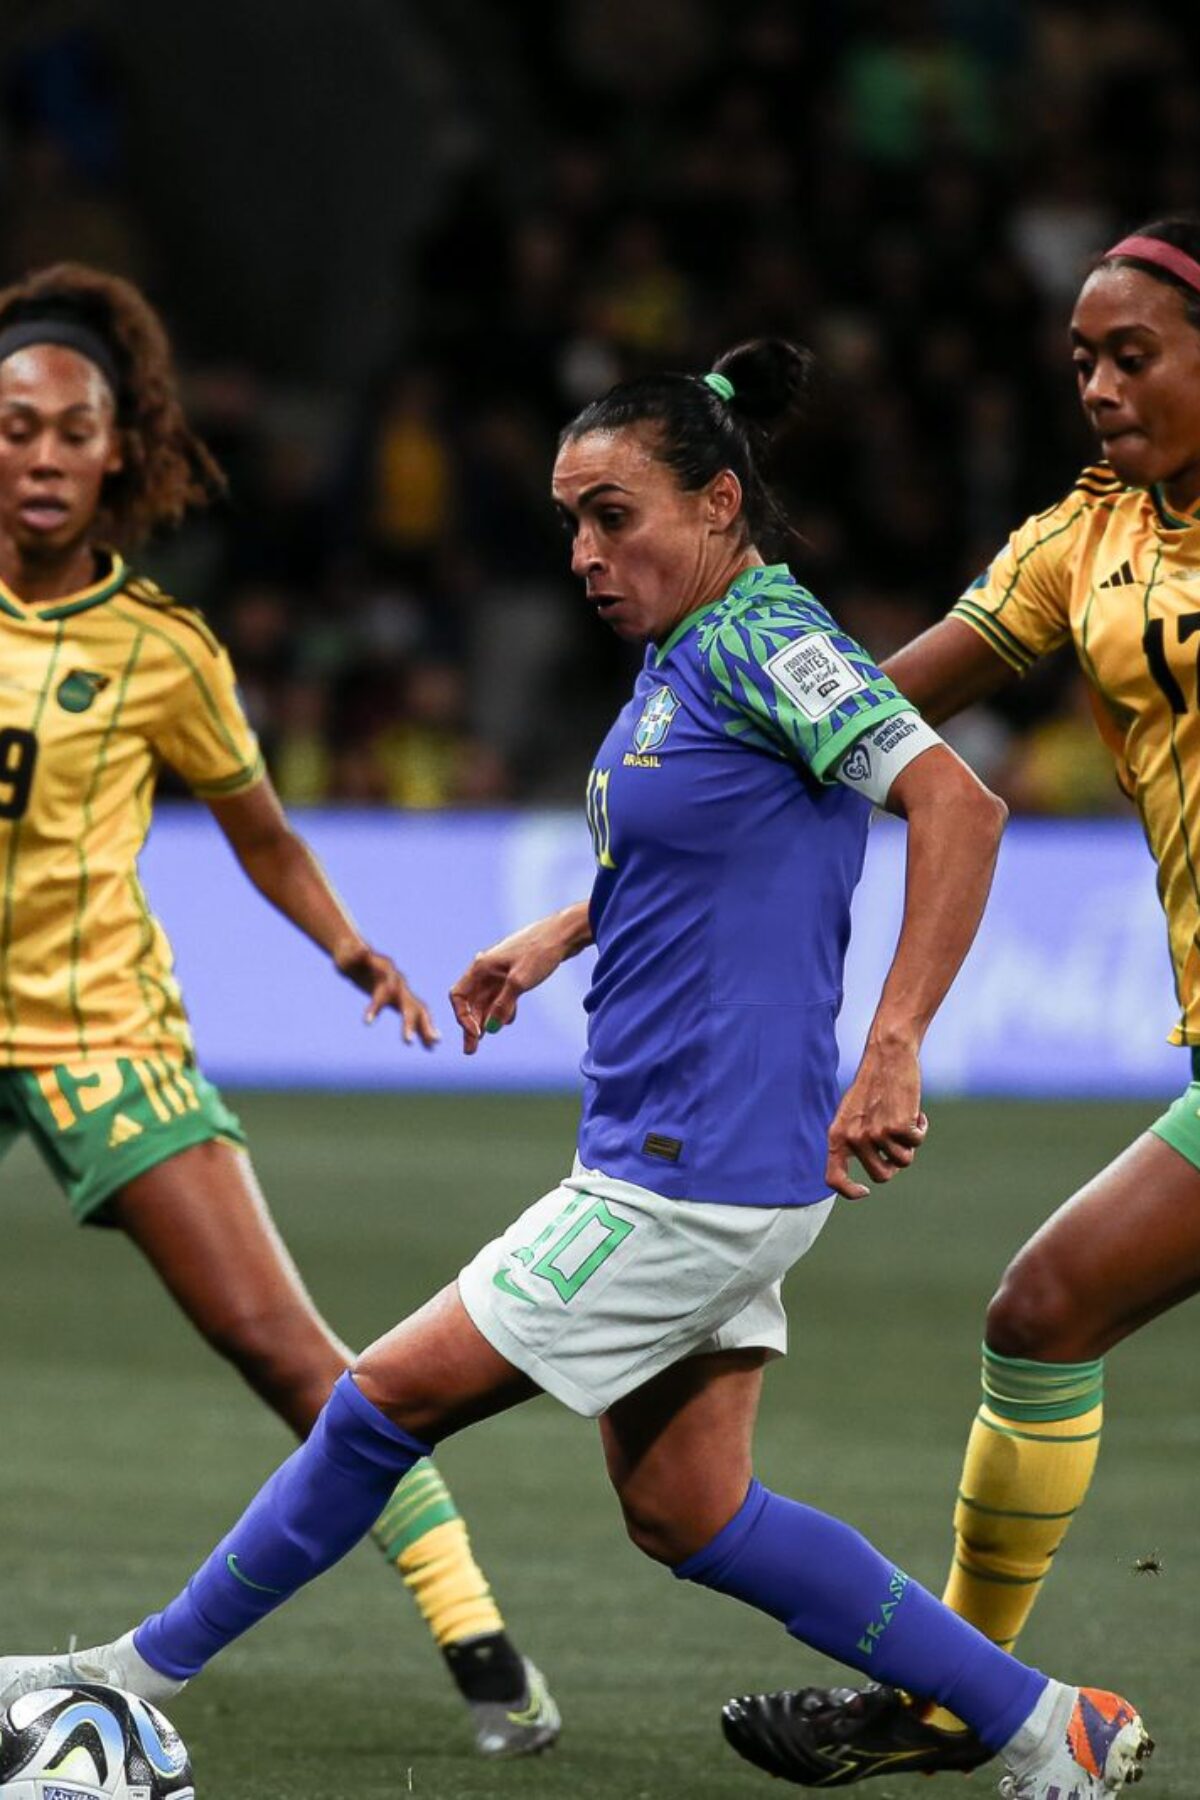 MELBOURNE, AUSTRALIA - AUGUST 2: Marta of Brazil controls the ball during the FIFA Women's World Cup Australia & New Zealand 2023 Group F match between Jamaica and Brazil at Melbourne Rectangular Stadium on August 2, 2023 in Melbourne, Australia. (Photo by Andrew Wiseman / DeFodi Images via Getty Images)